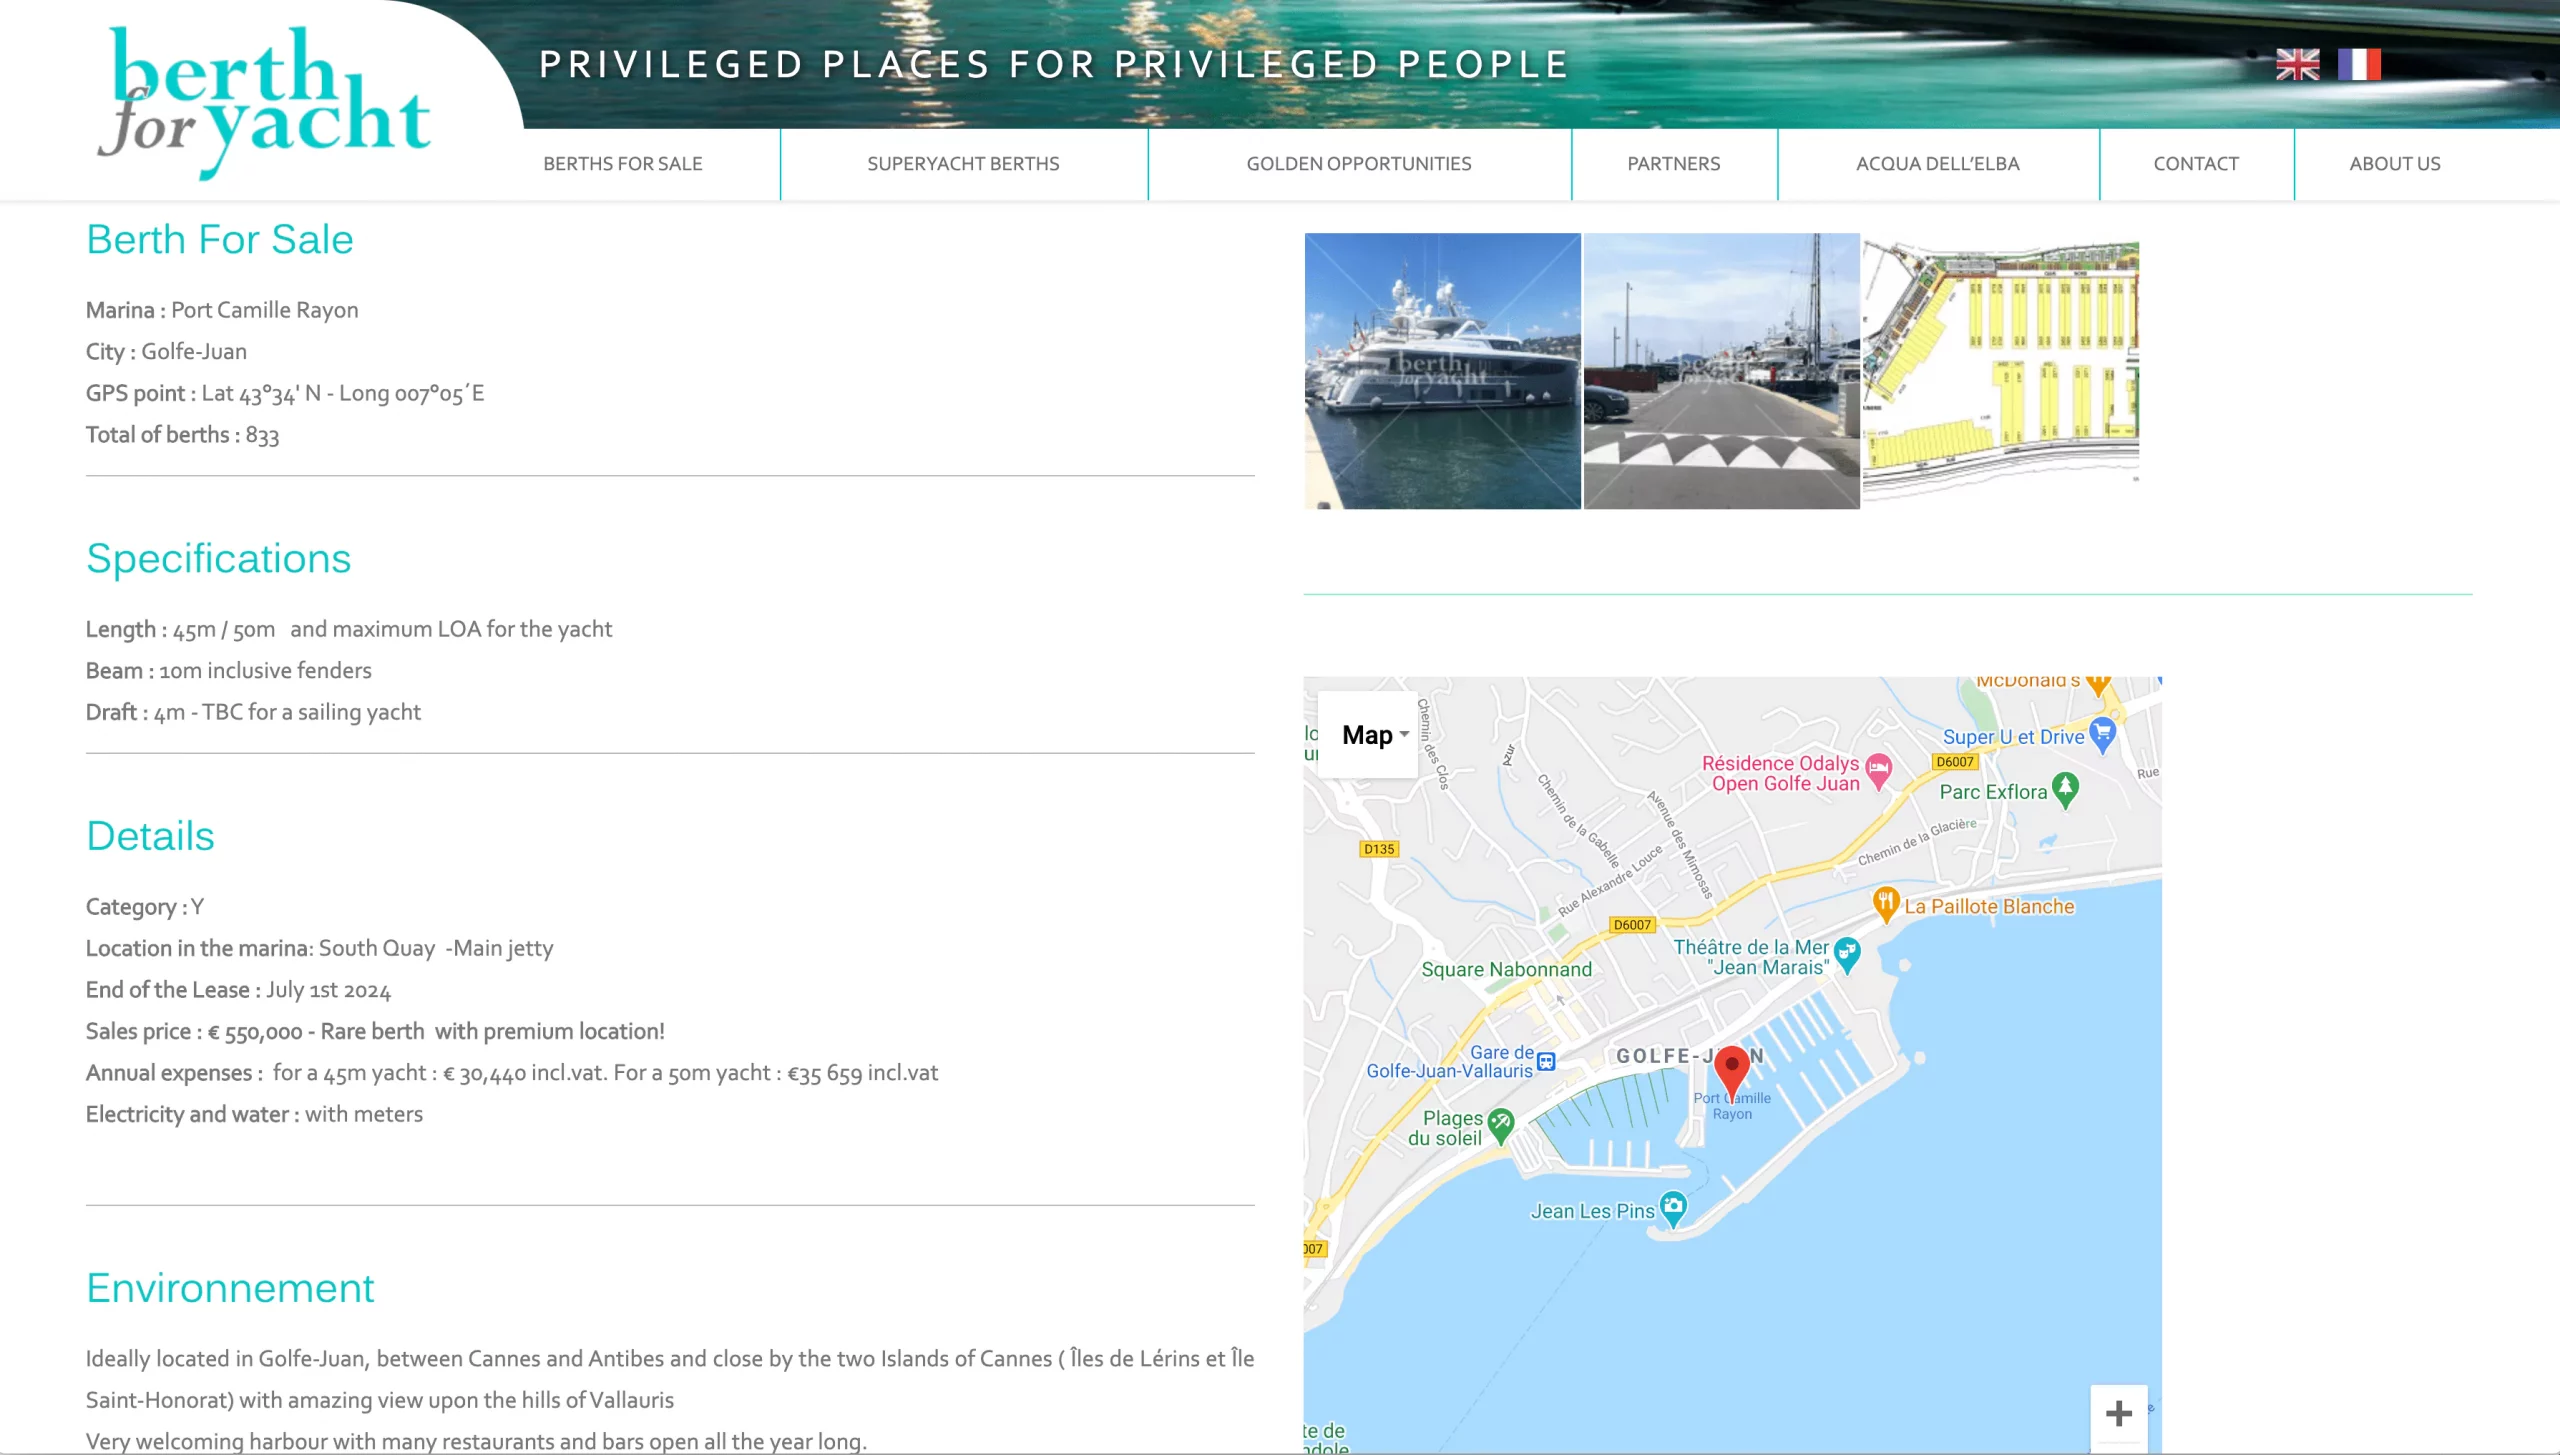 baccana-digital-consulting-project-berth-for-yacht-wordpress-website-berth-for-sale-port-camille-rayon